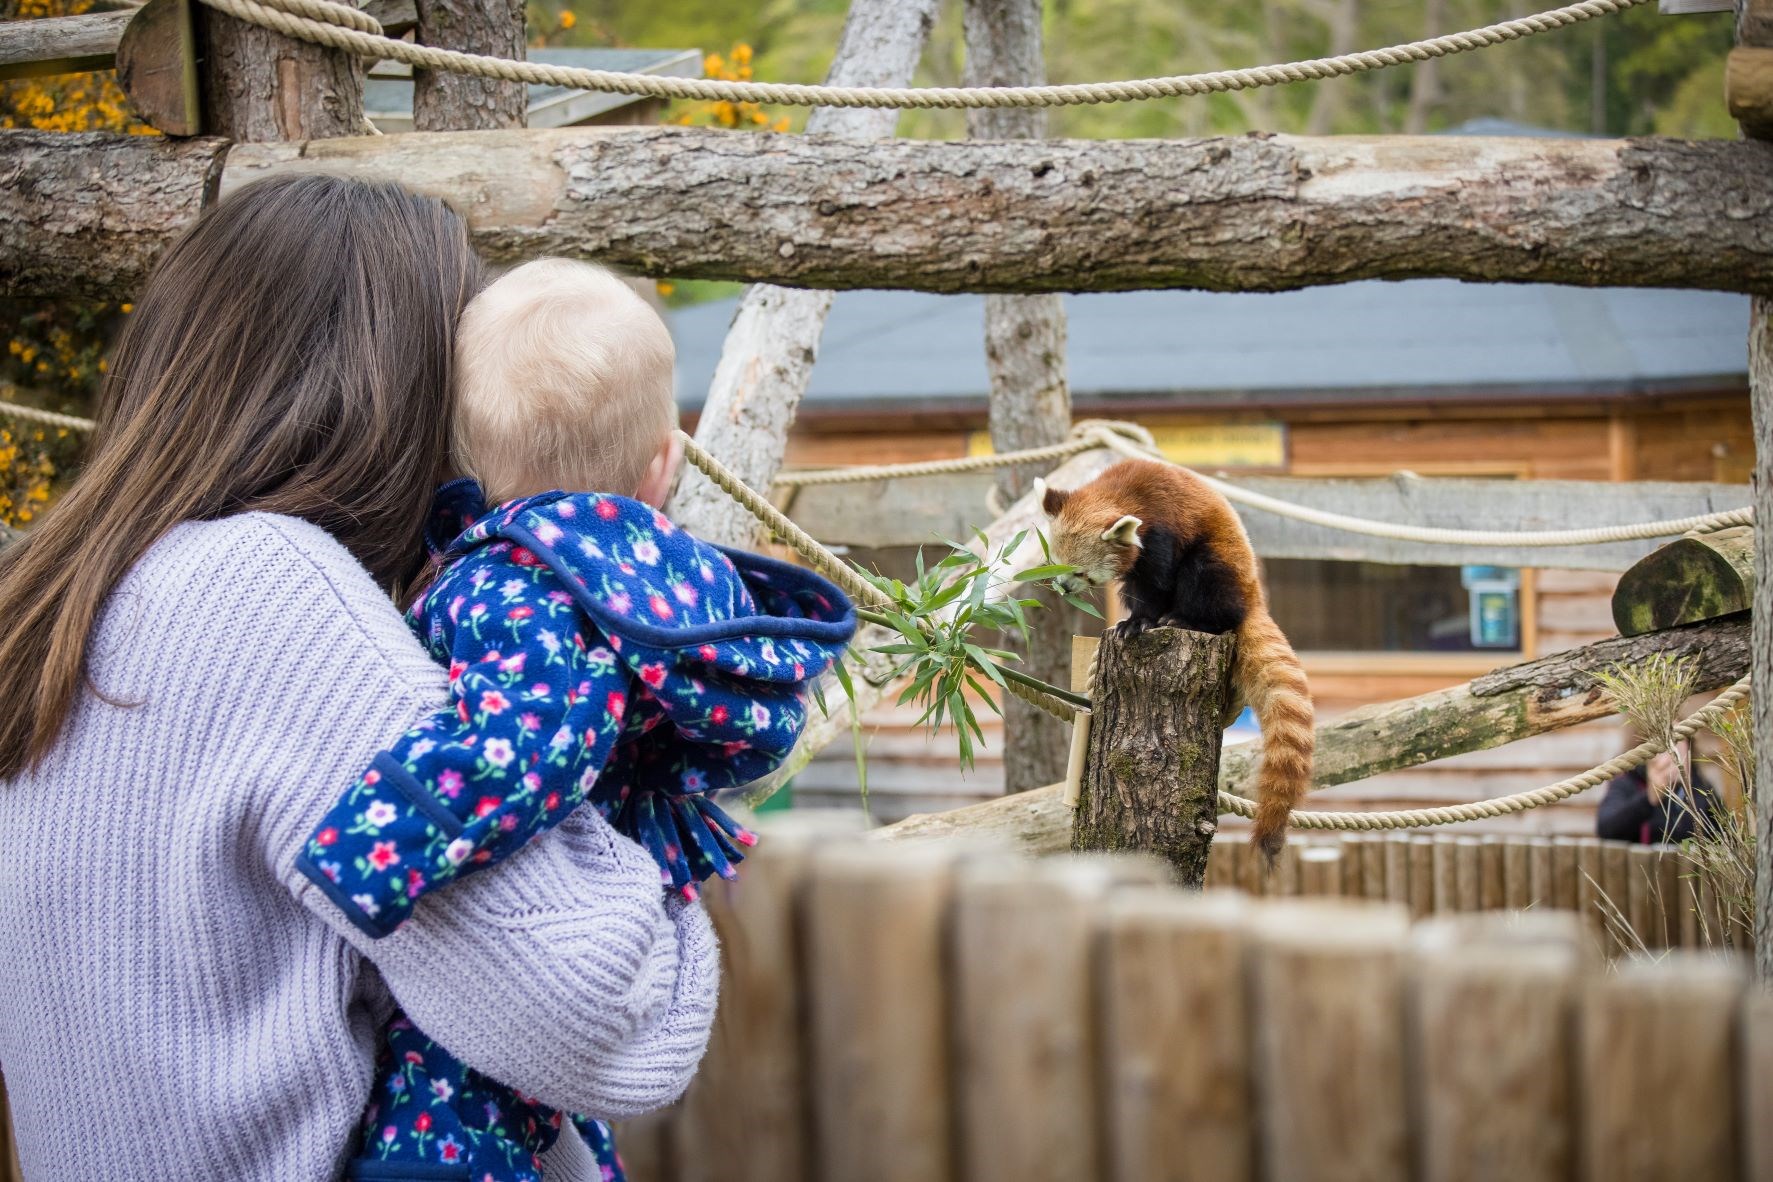 Woman holds young child and looks at red panda sitting on stump in enclosure